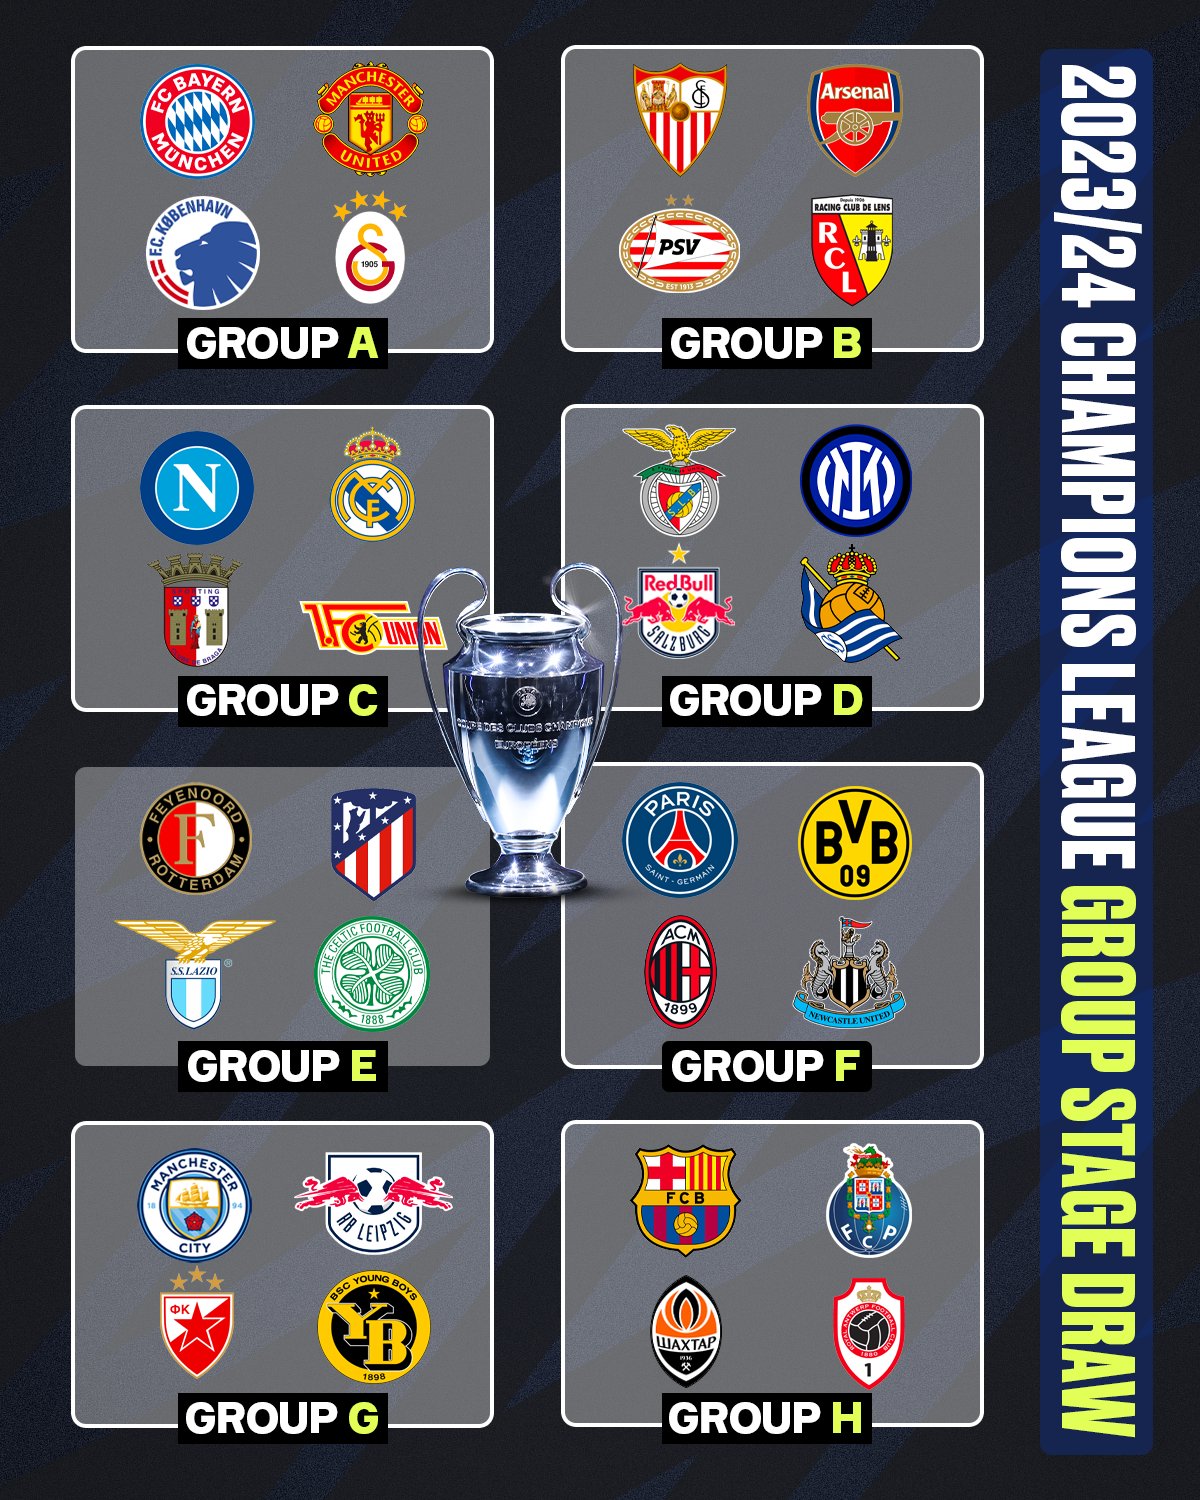 OC] UEFA Champions League Group Stage 2023/24 Infographic : r/soccer